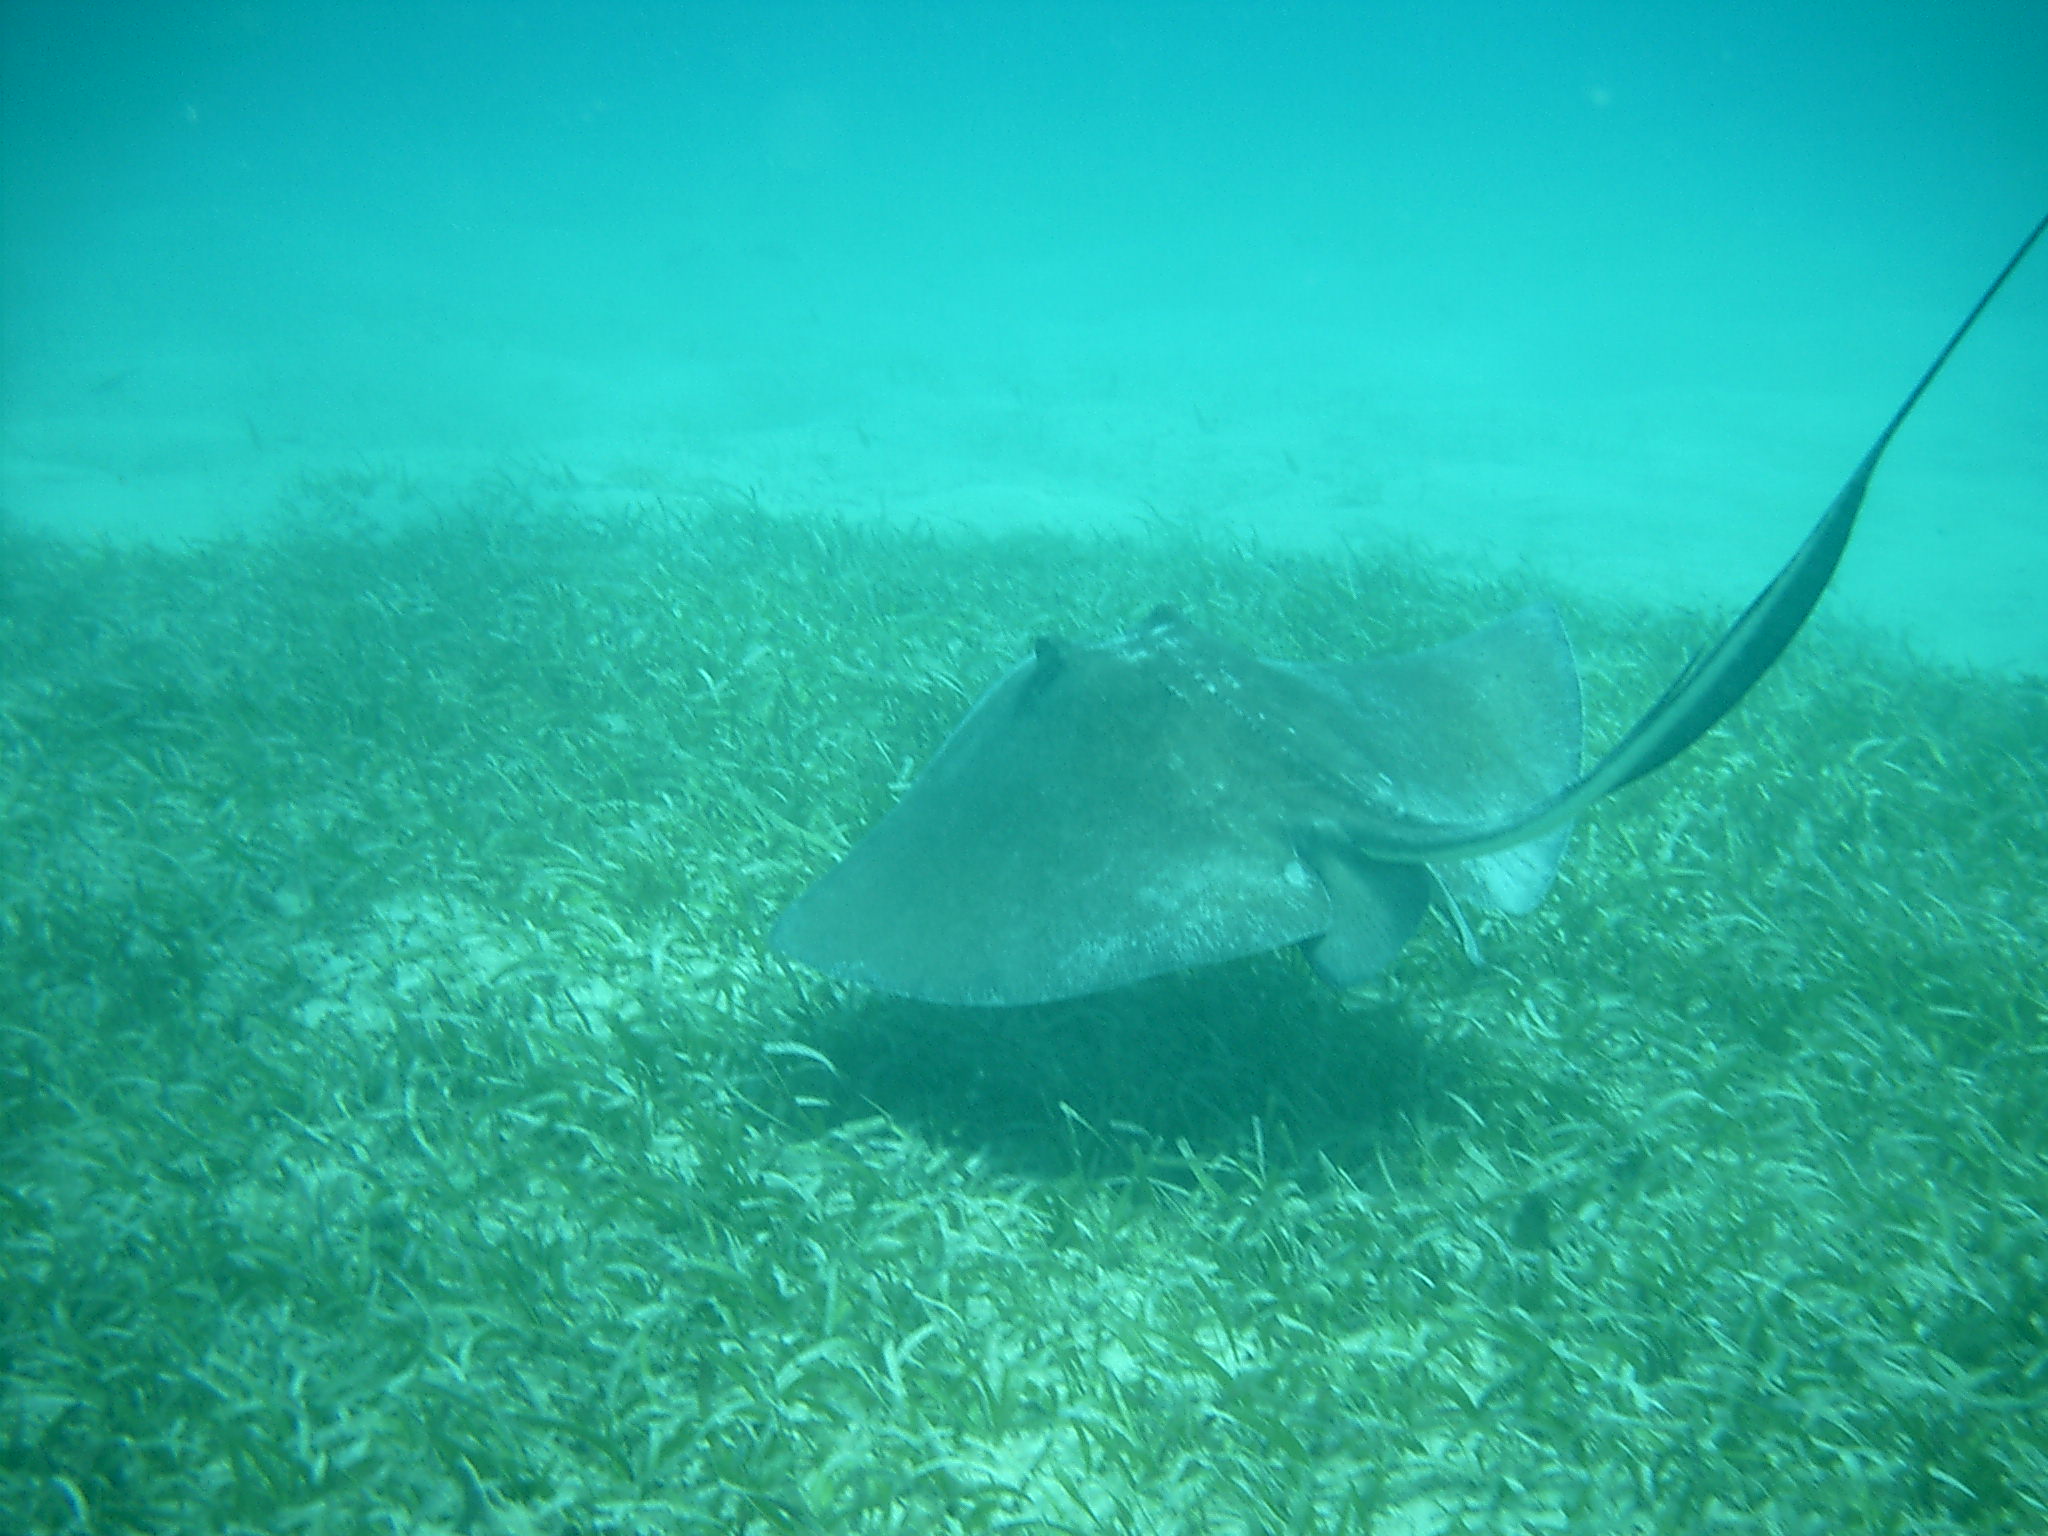 A stringray over a grassy patch in Culebra, one of the Spanish Virgin Islands off of Puerto Rico